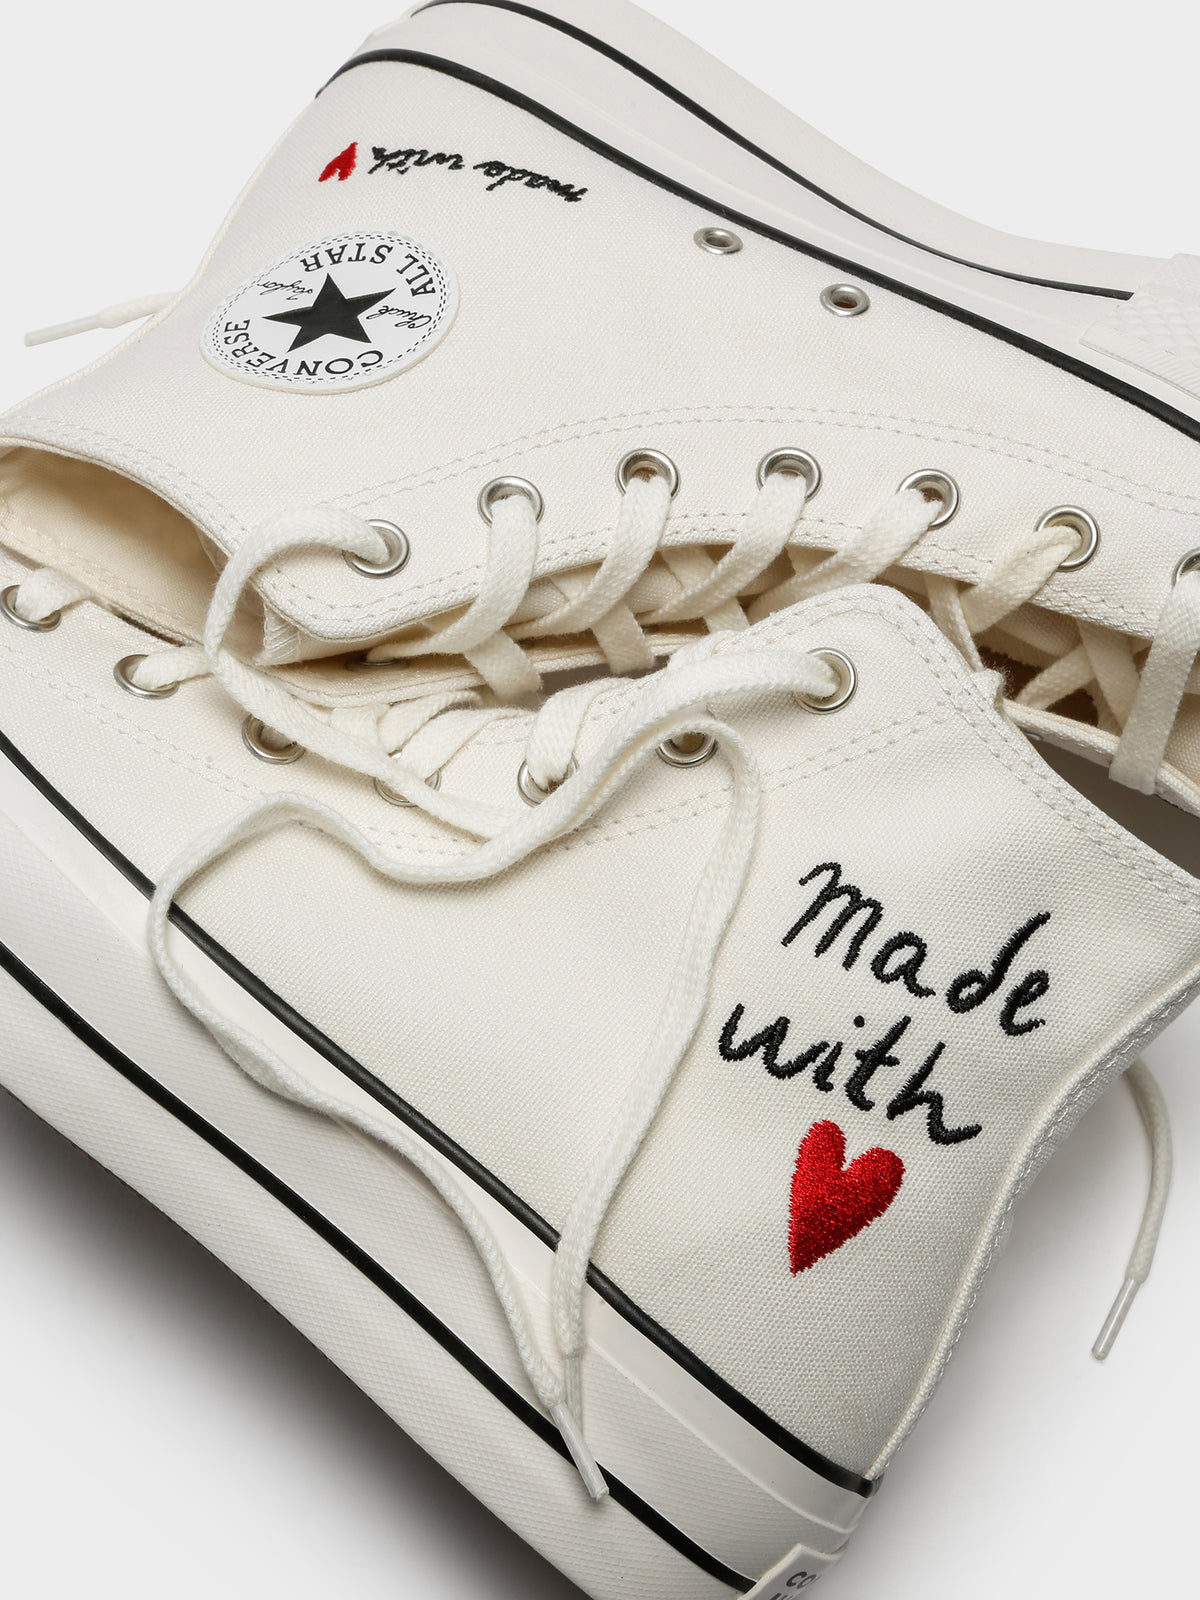 Womens Made With Love Platform Chuck Taylor All Star High Top Sneakers in Vintage White